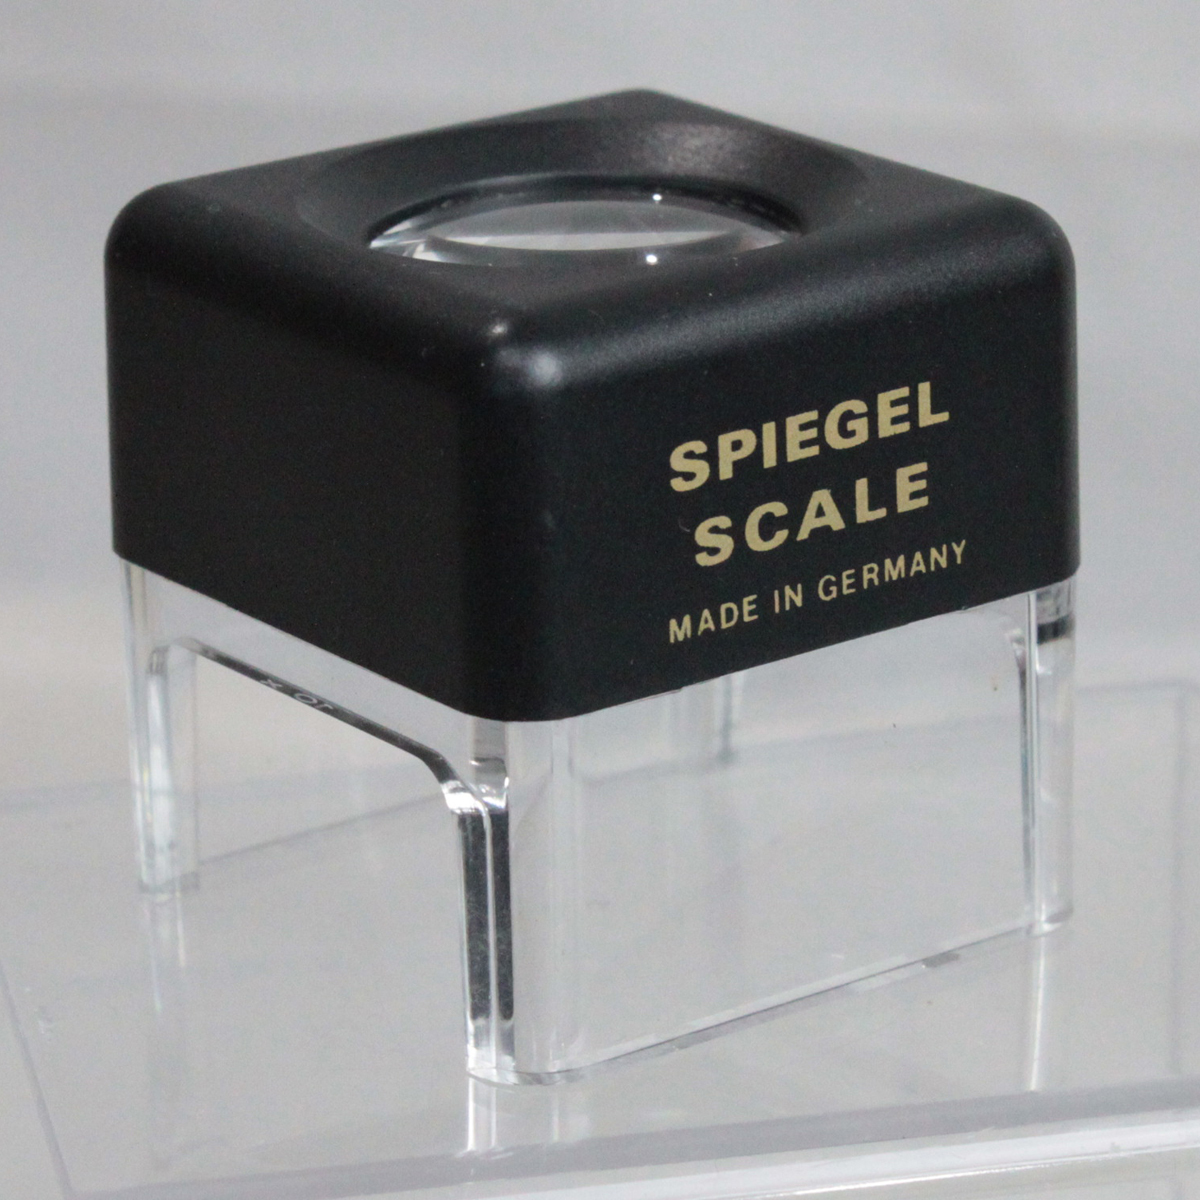 031429 [ beautiful goods Spee gel ] SPIEGEL stand magnifier 10 times scale attaching Made in Germany